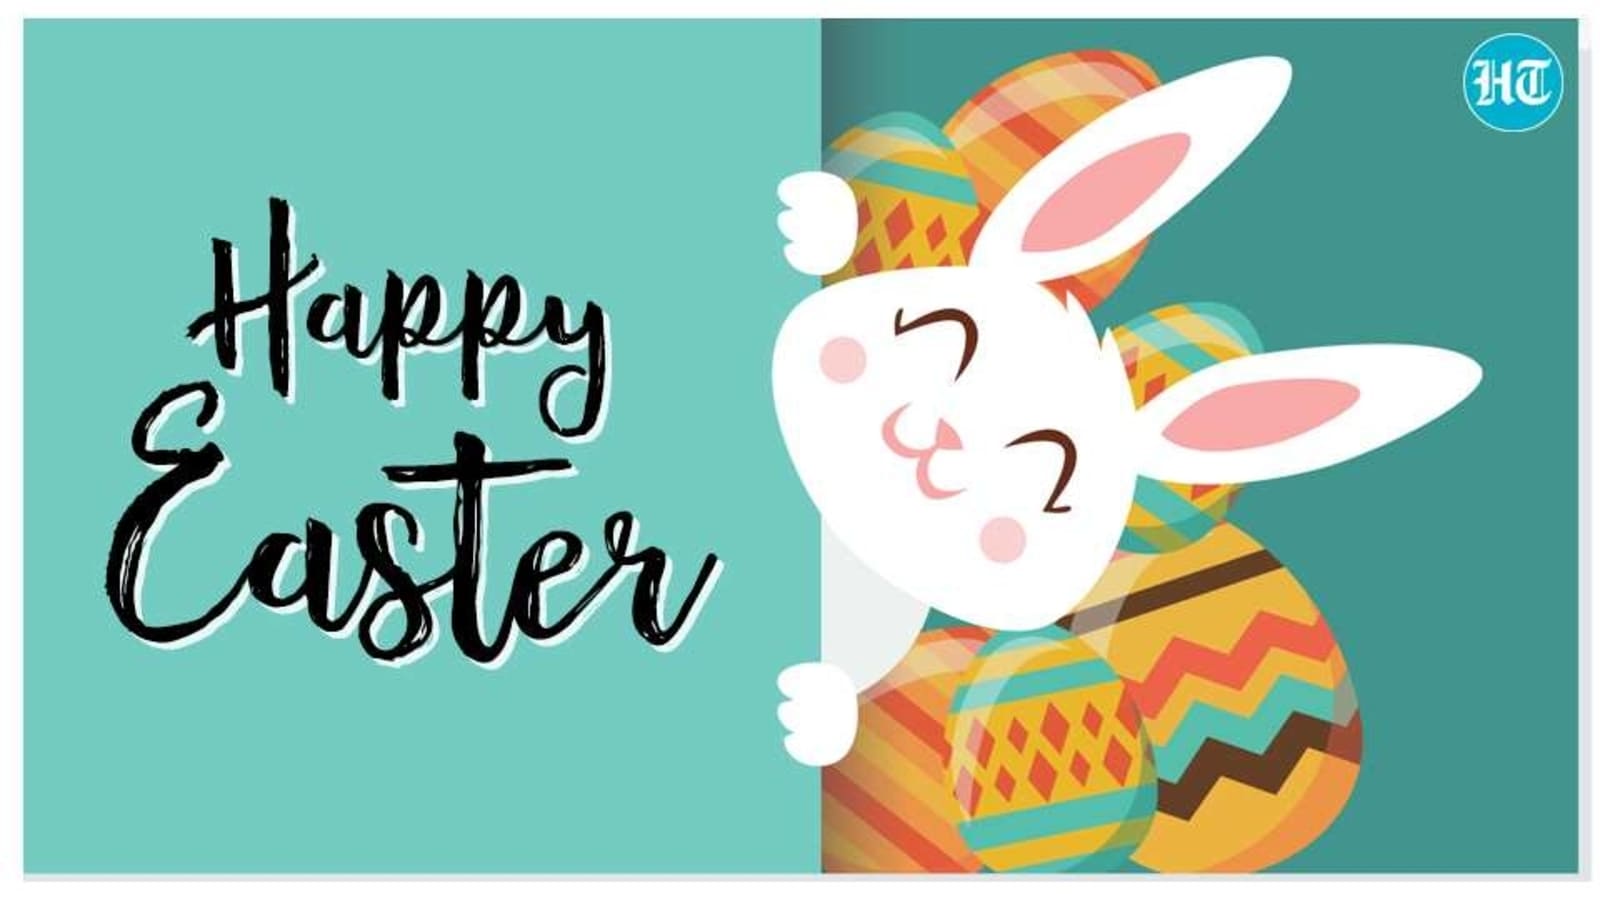 Easter 2021: Images, wishes and sweet quotes to share with loved ...